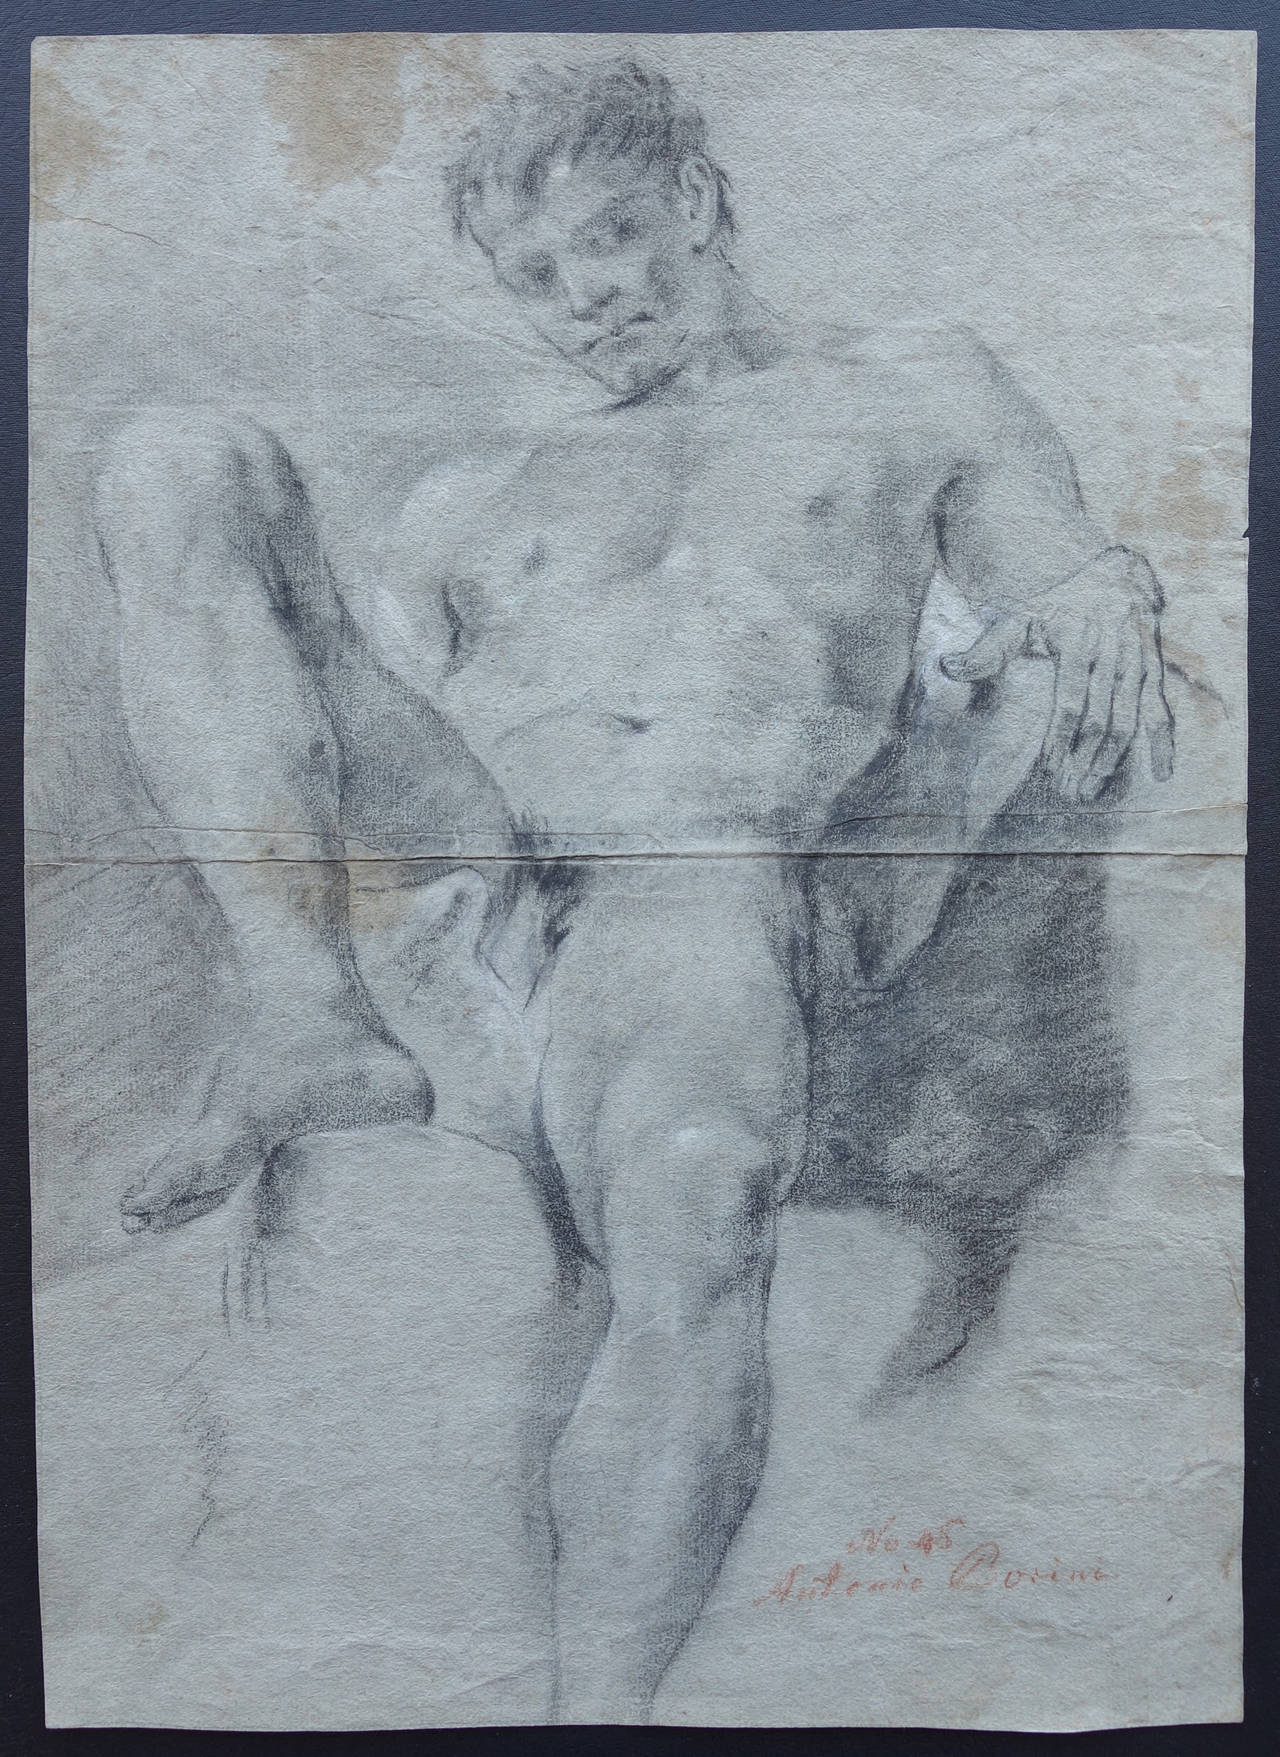 This double sided study by the Bolognese painter Giovanni Antonio Burrini exemplifies the stylistic legacy of studio practice of the Carracci and Pietro Faccini at the start of the 17th century. There is also an especially strong correlation to the